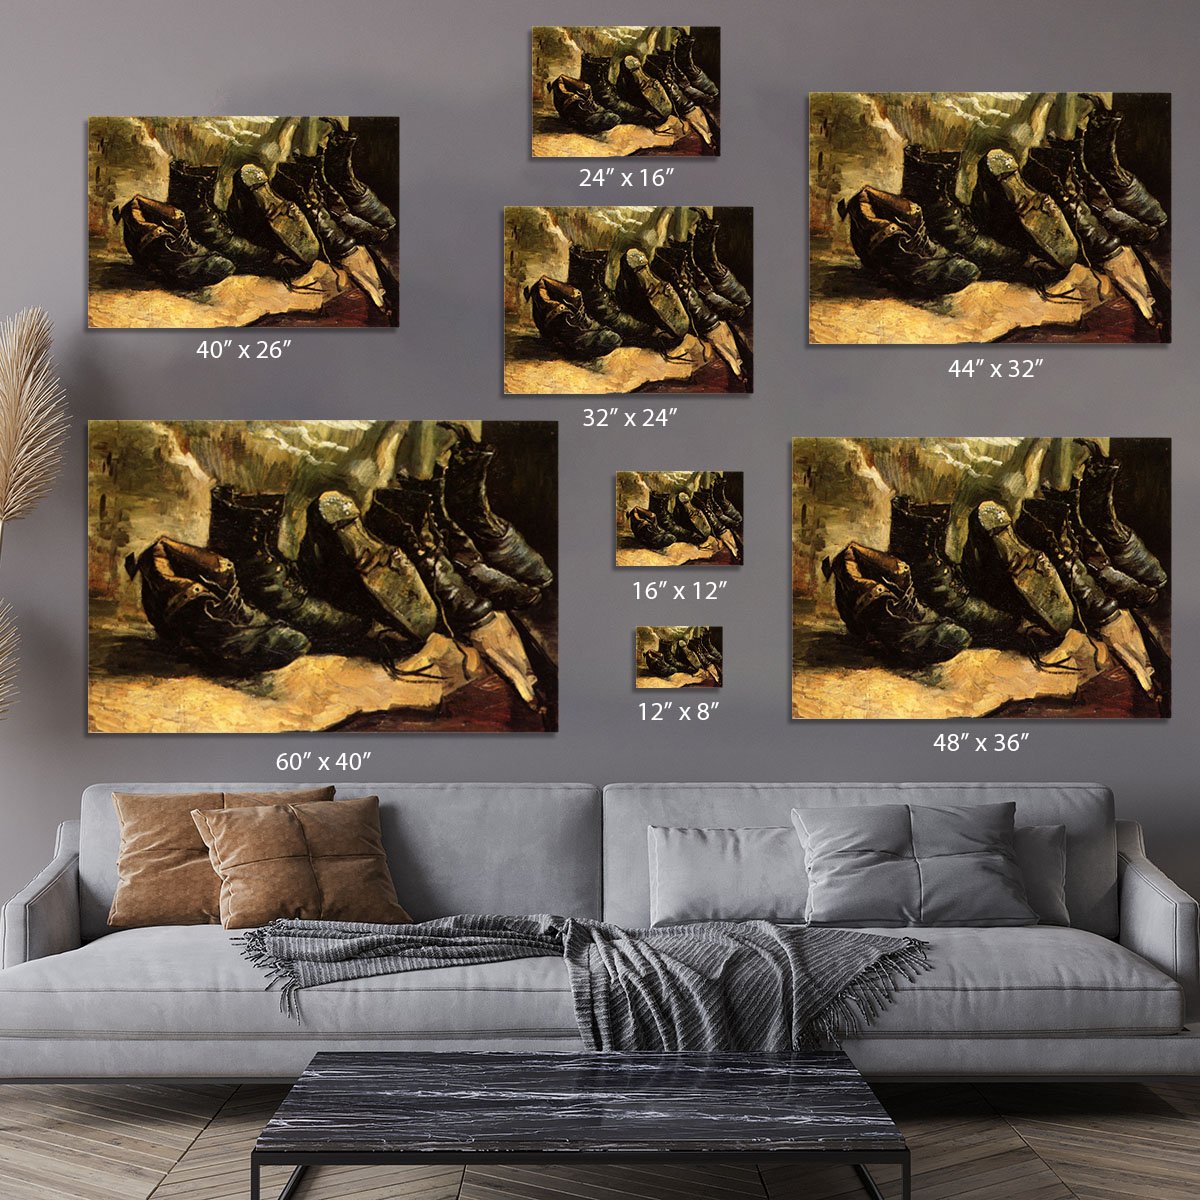 Three Pairs of Shoes by Van Gogh Canvas Print or Poster